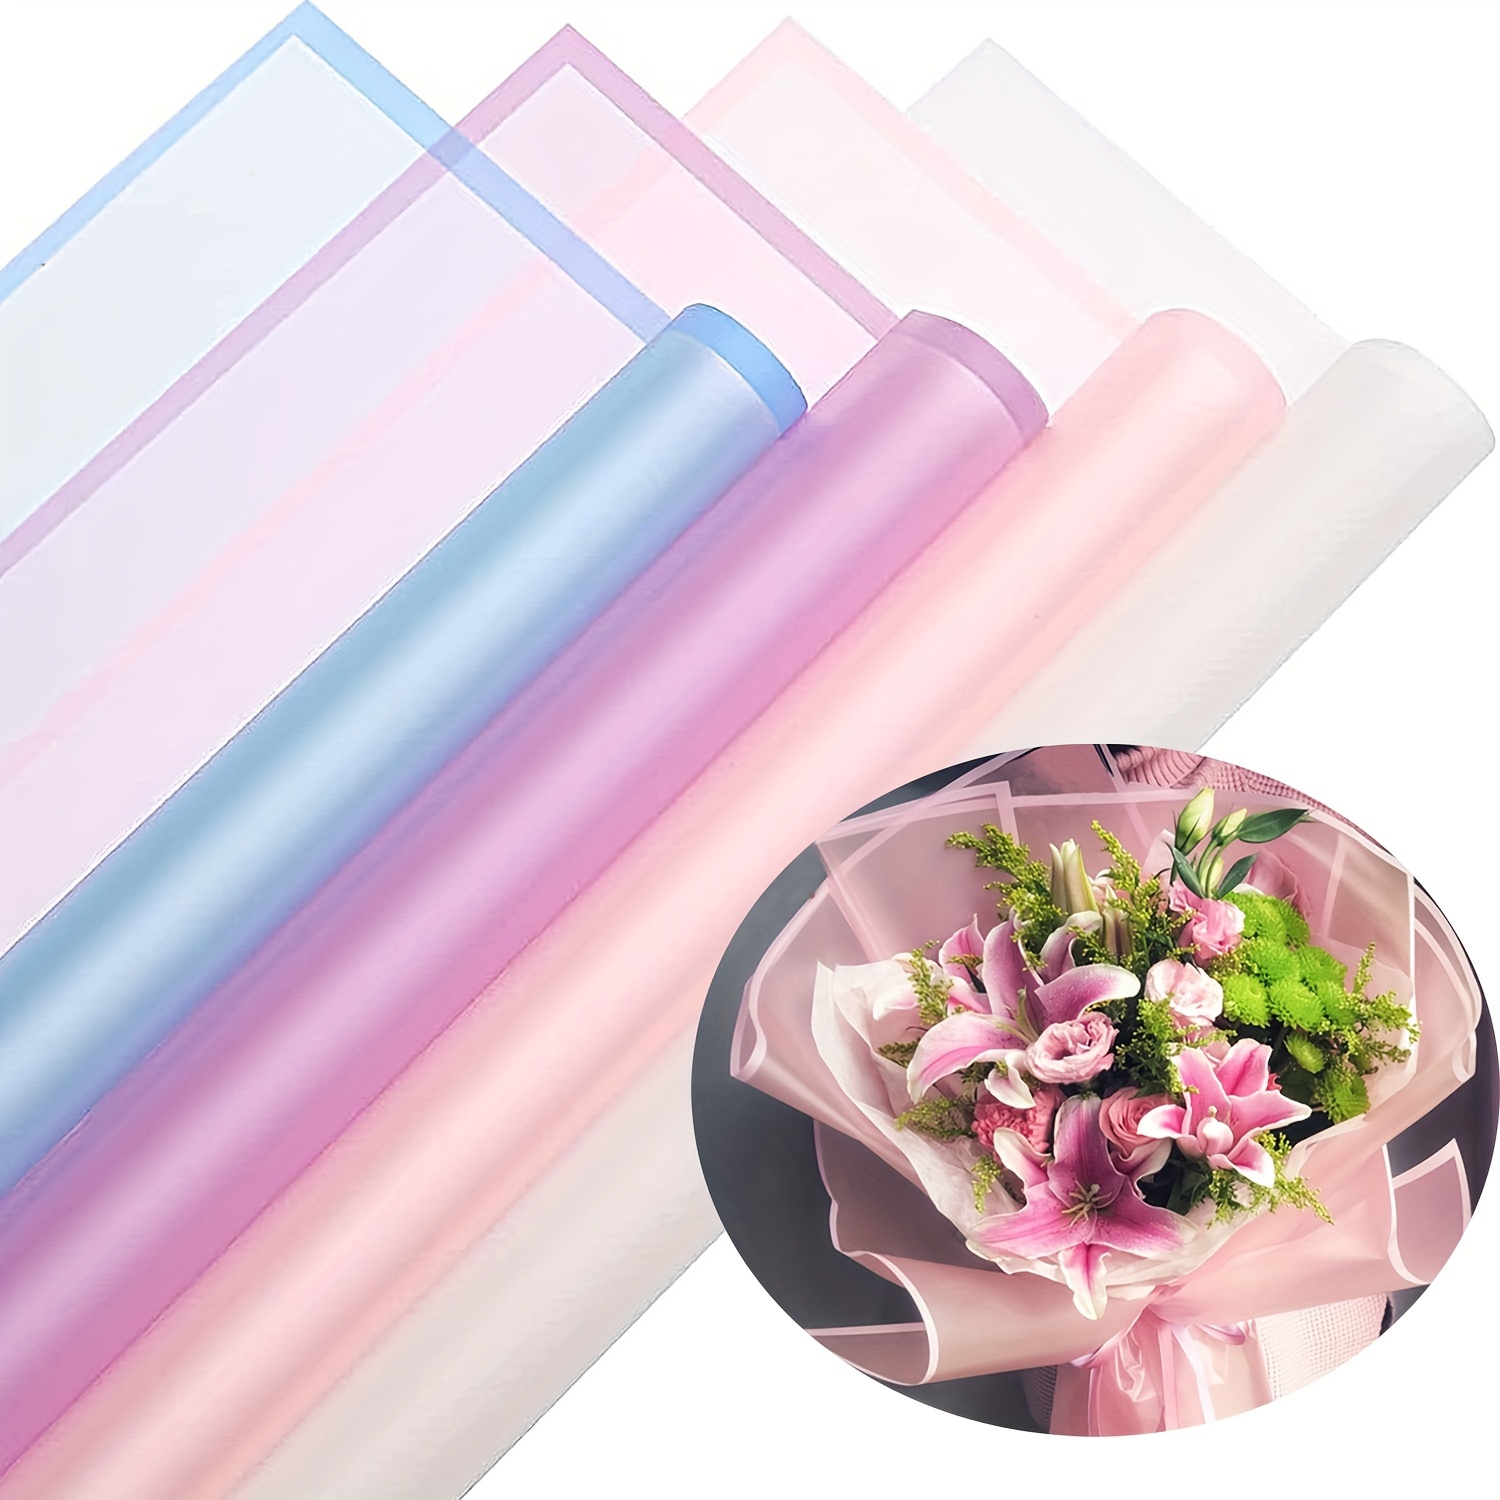 20 Sheets Flower Wrapping Paper - Waterproof Floral Bouquet